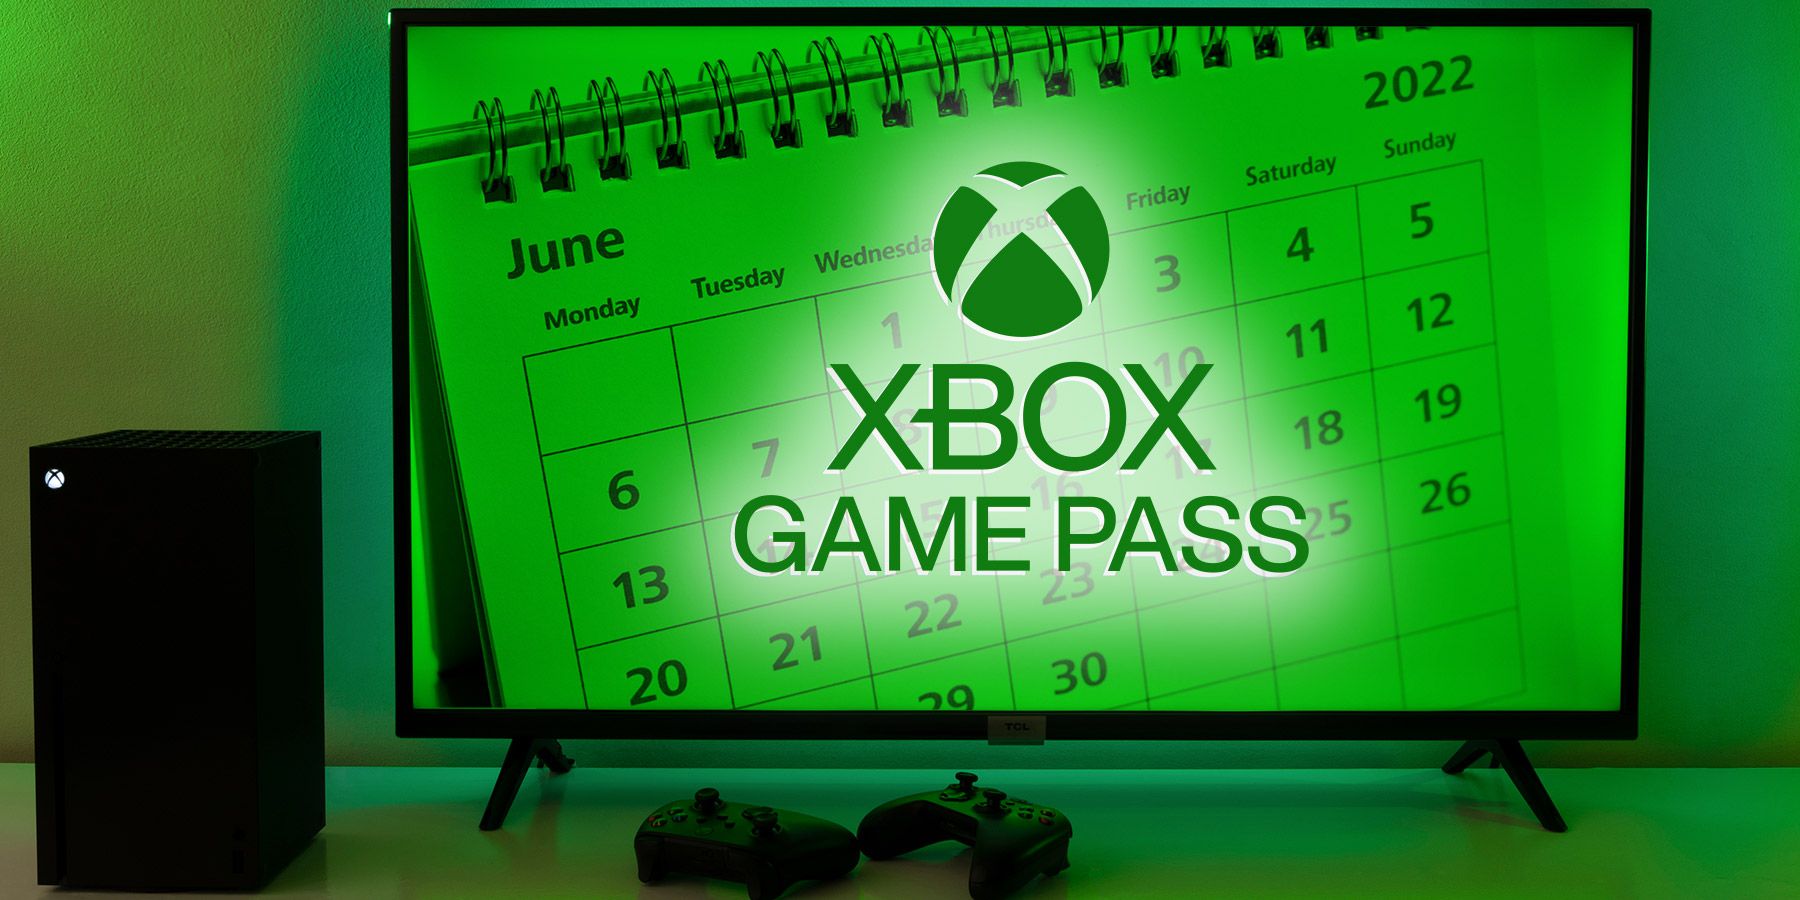 Xbox Game Pass Already Has 4 Games Announced for June 2022